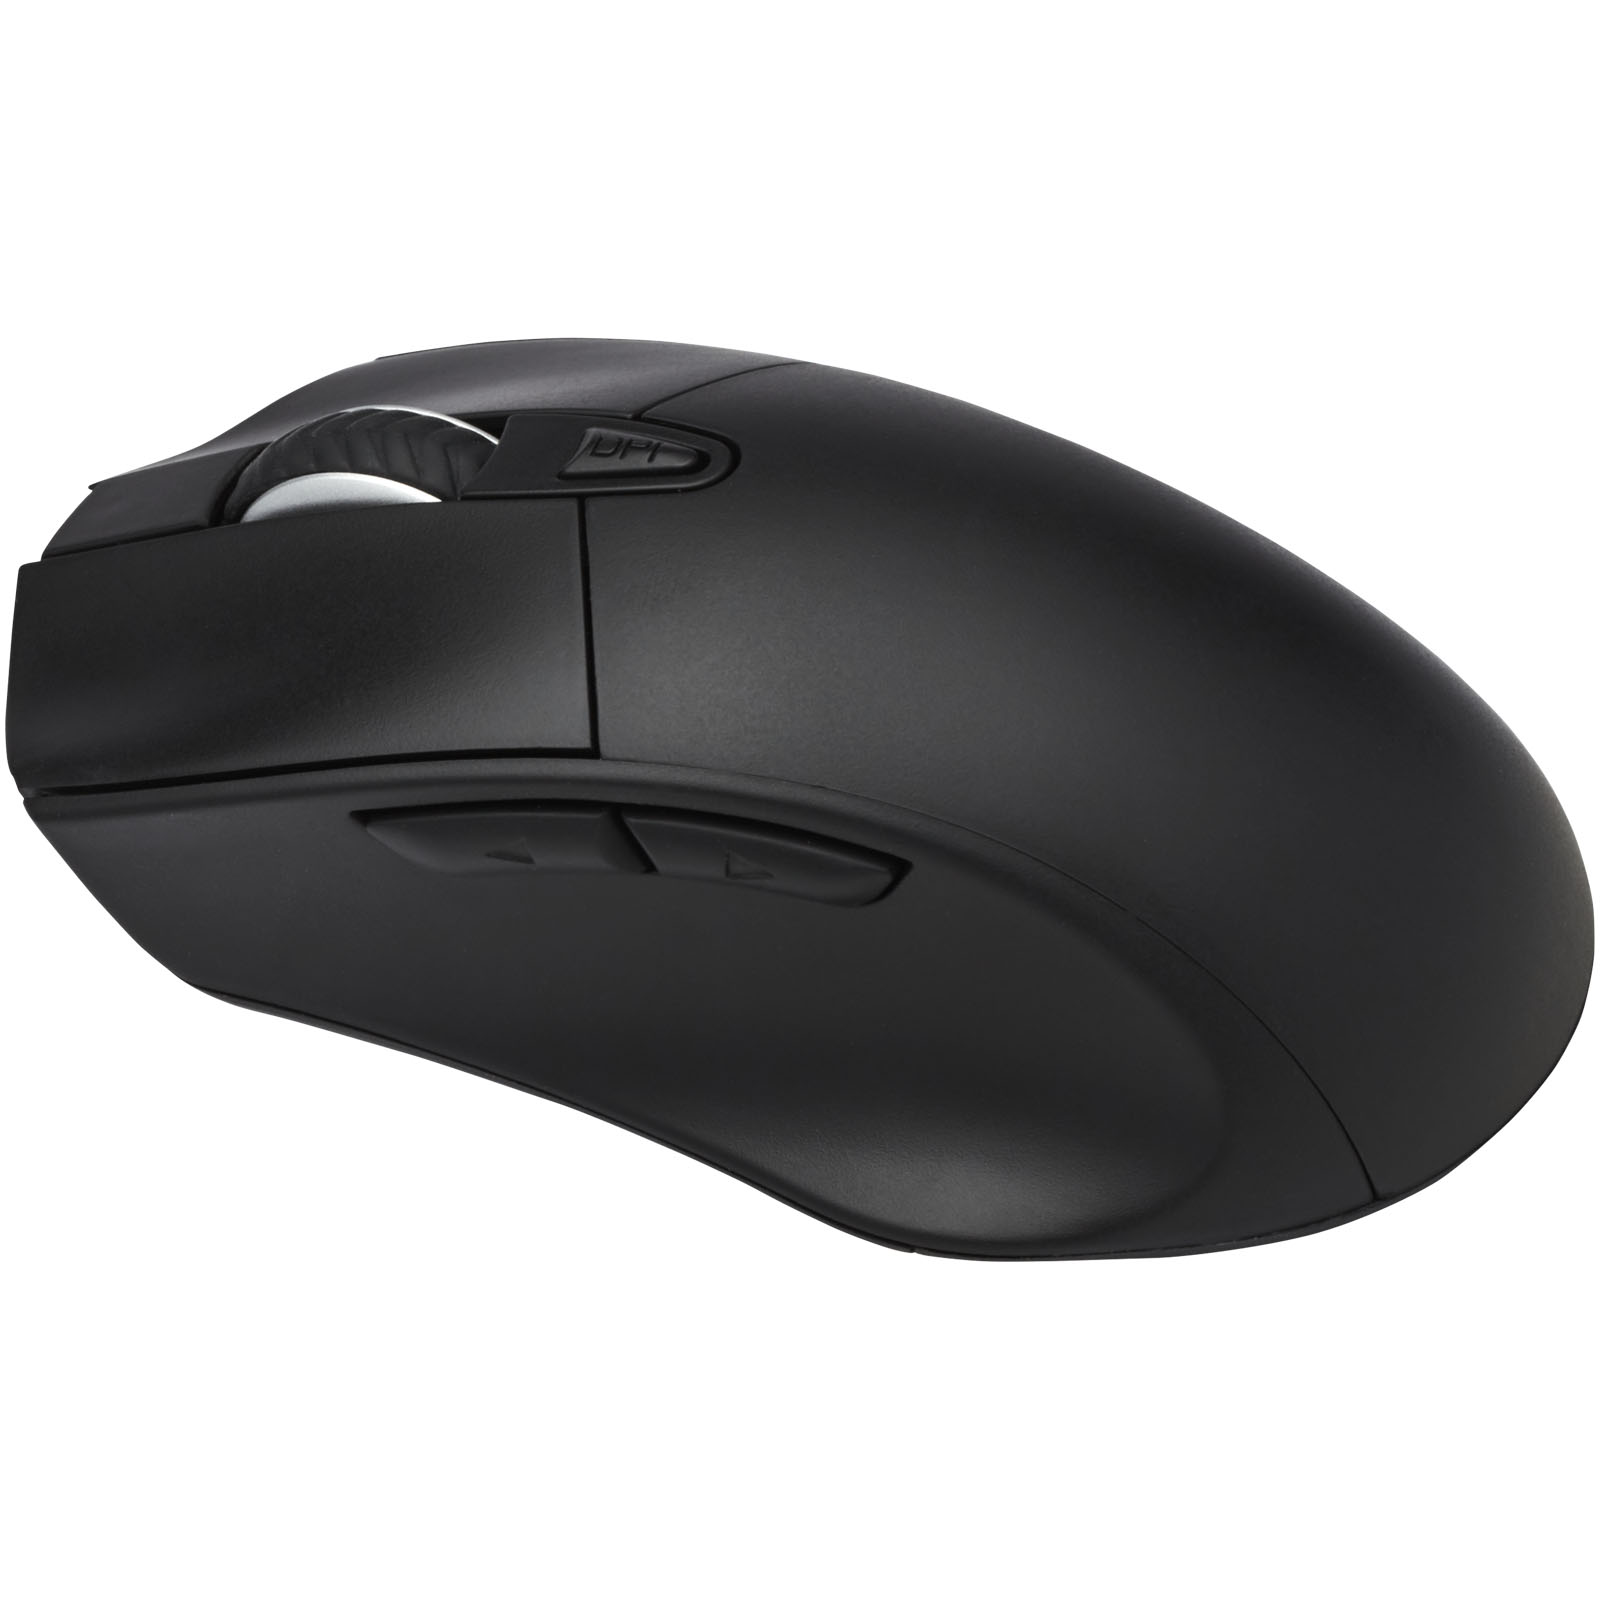 An antibacterial, wireless optical mouse that allows you to adjust DPI settings - Knutsford